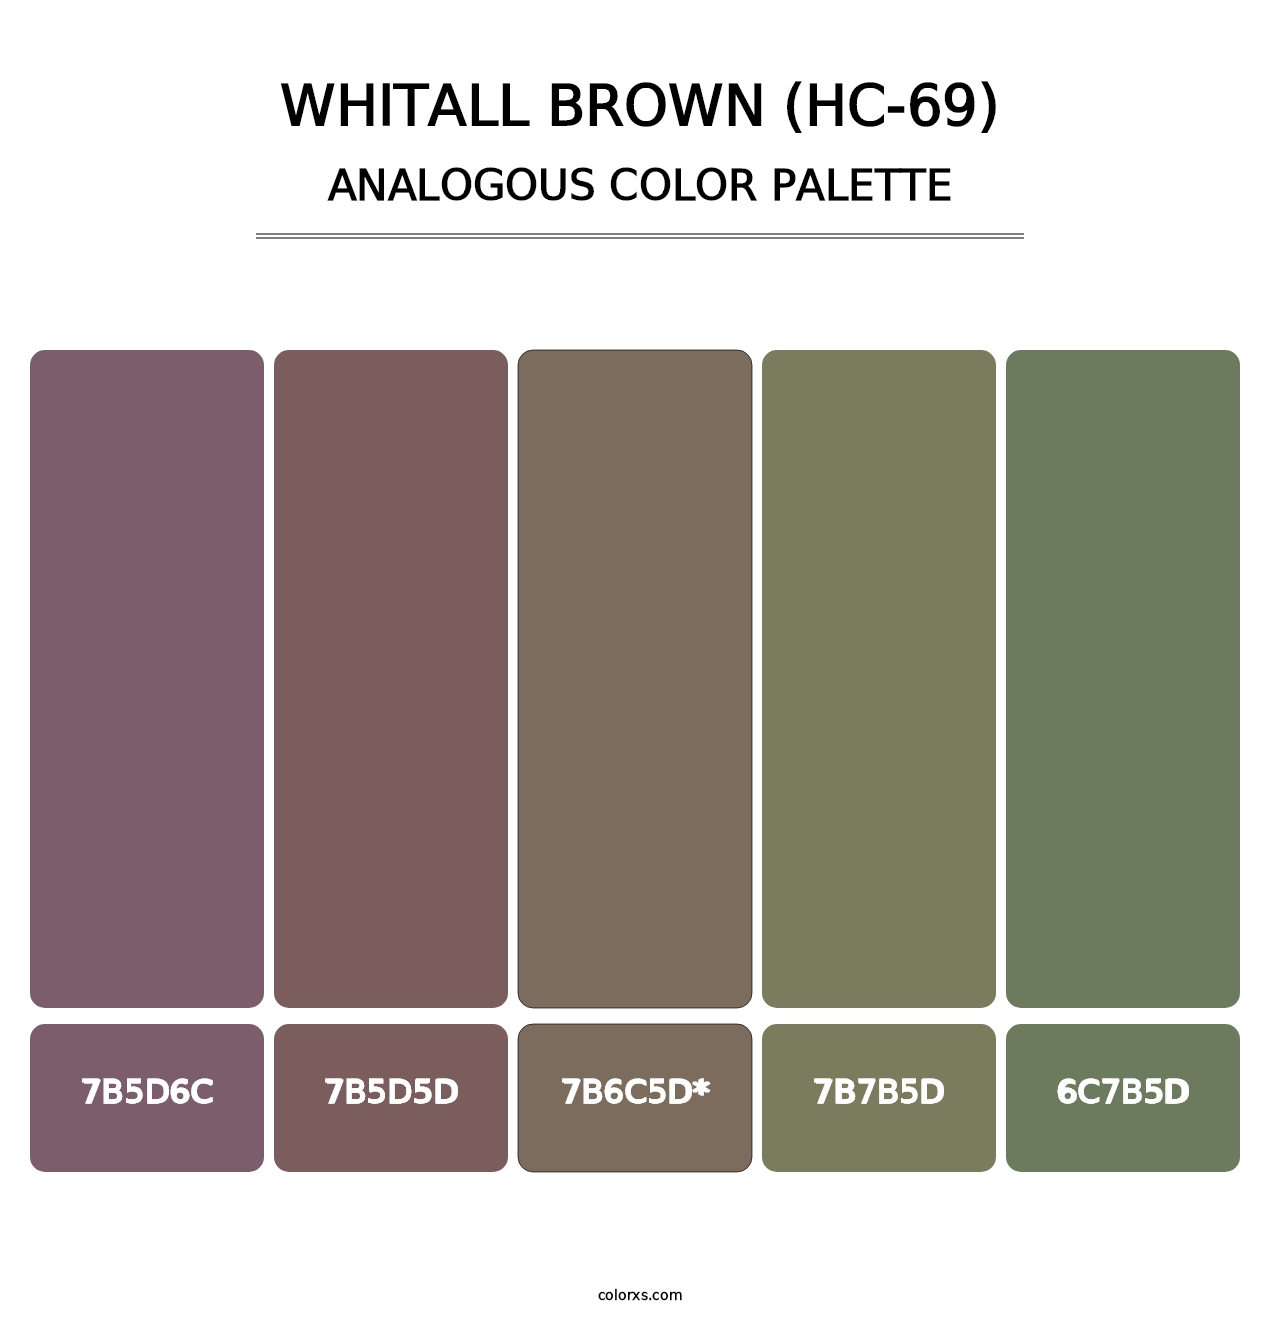 Whitall Brown (HC-69) - Analogous Color Palette